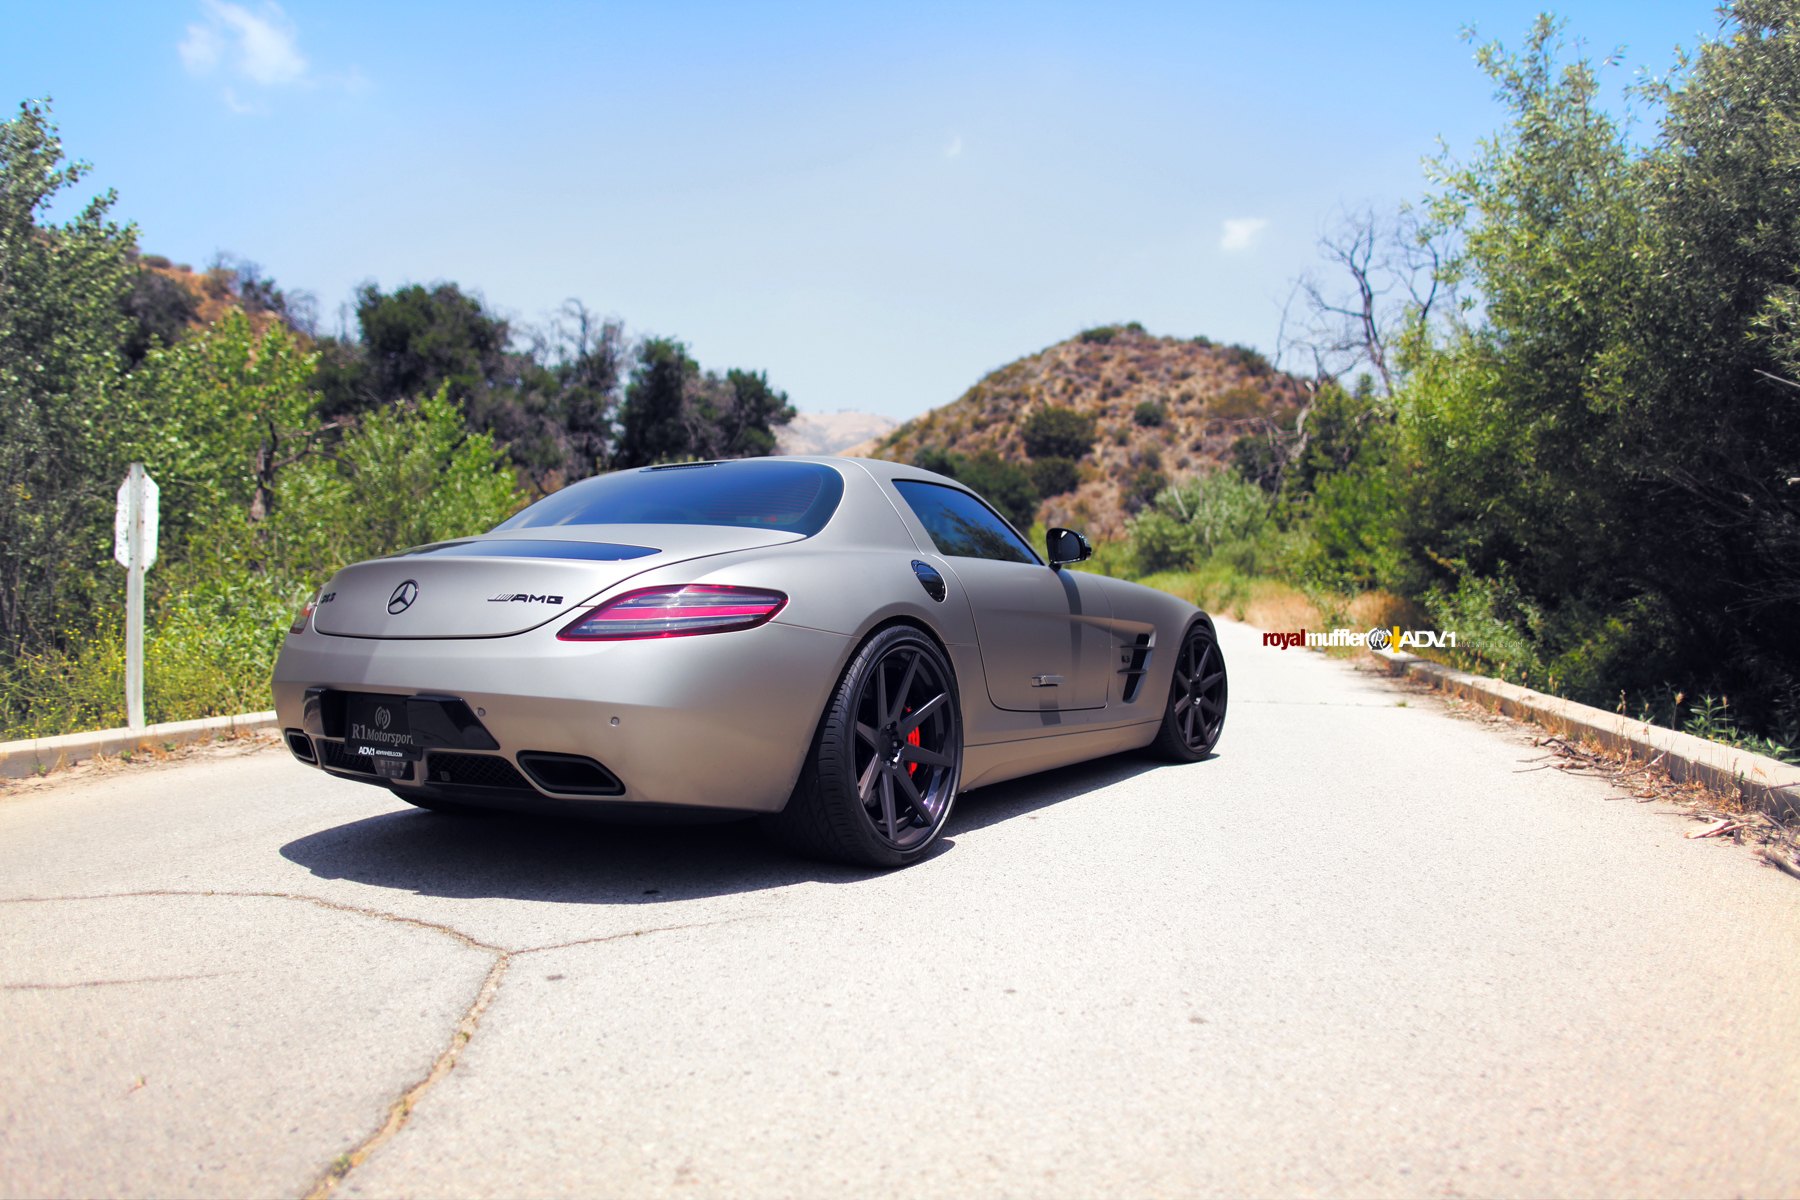 Silver Mercedes SLS with Red LED Taillights - Photo by ADV.1